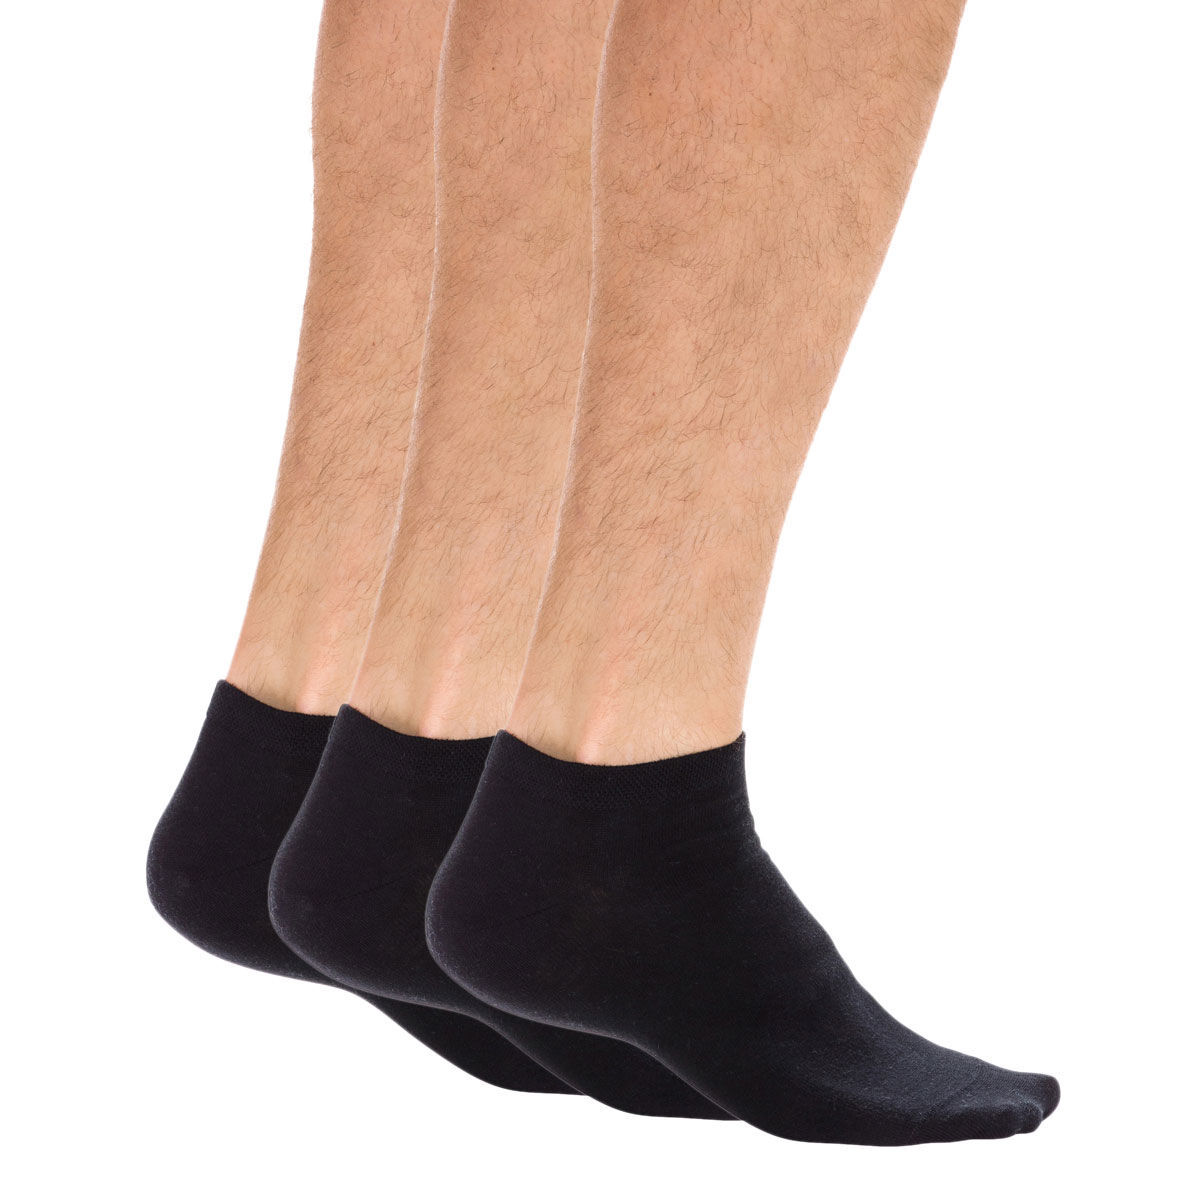 pairs of black invisible trainer socks 